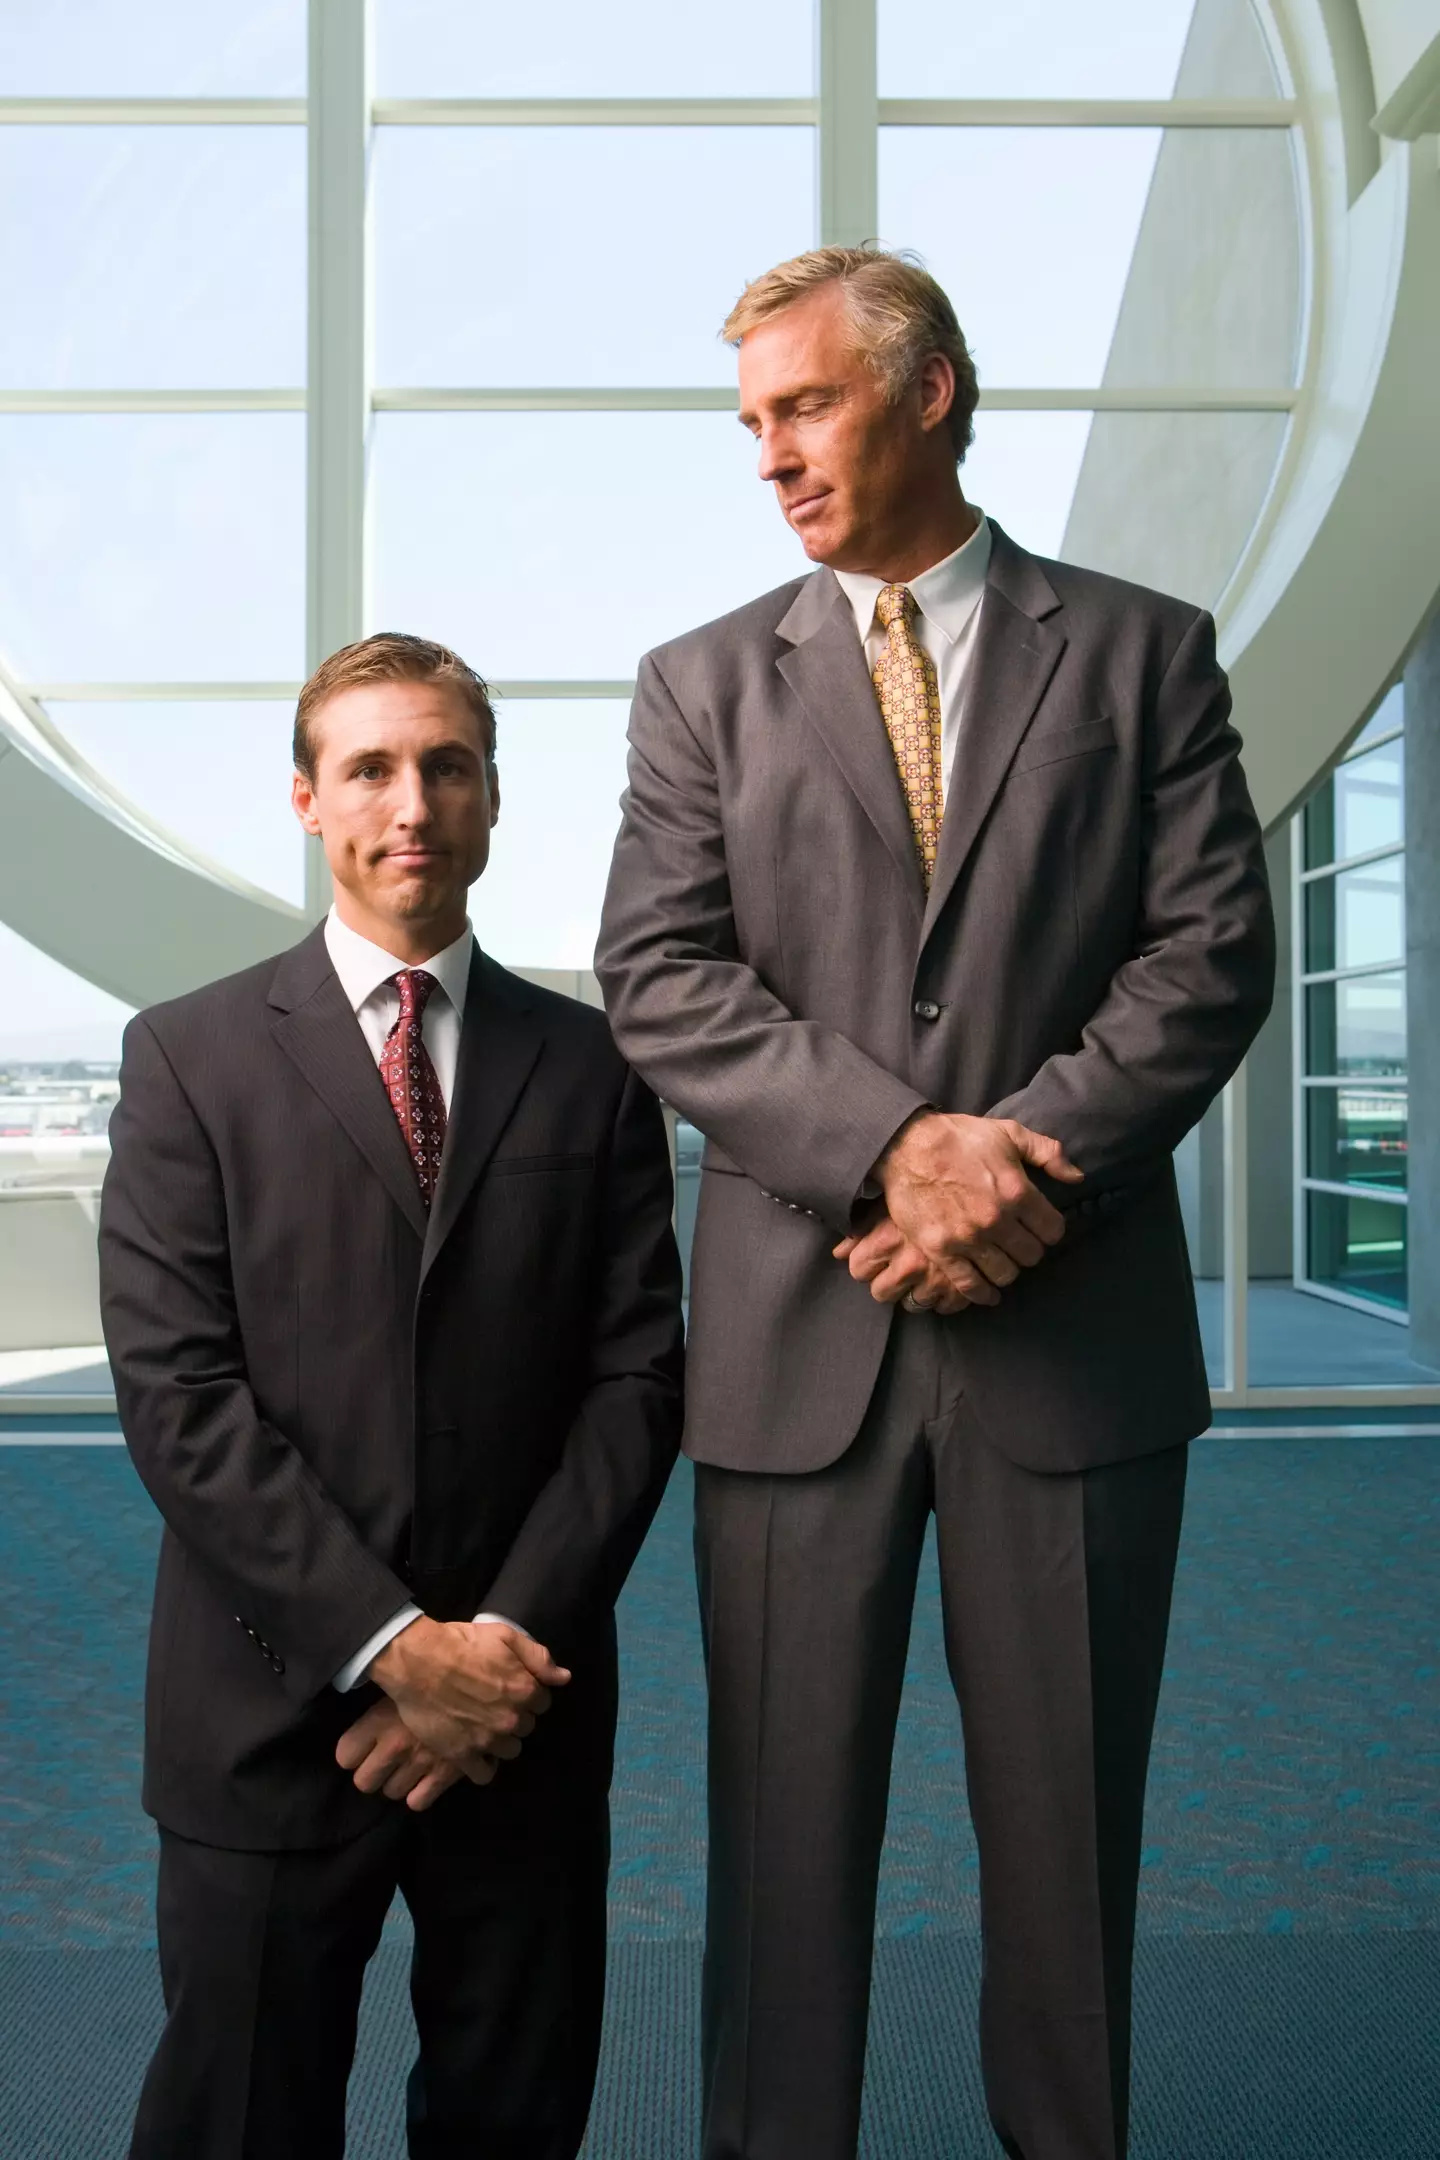 Some men will pay thousands to be a few inches taller (stock image).